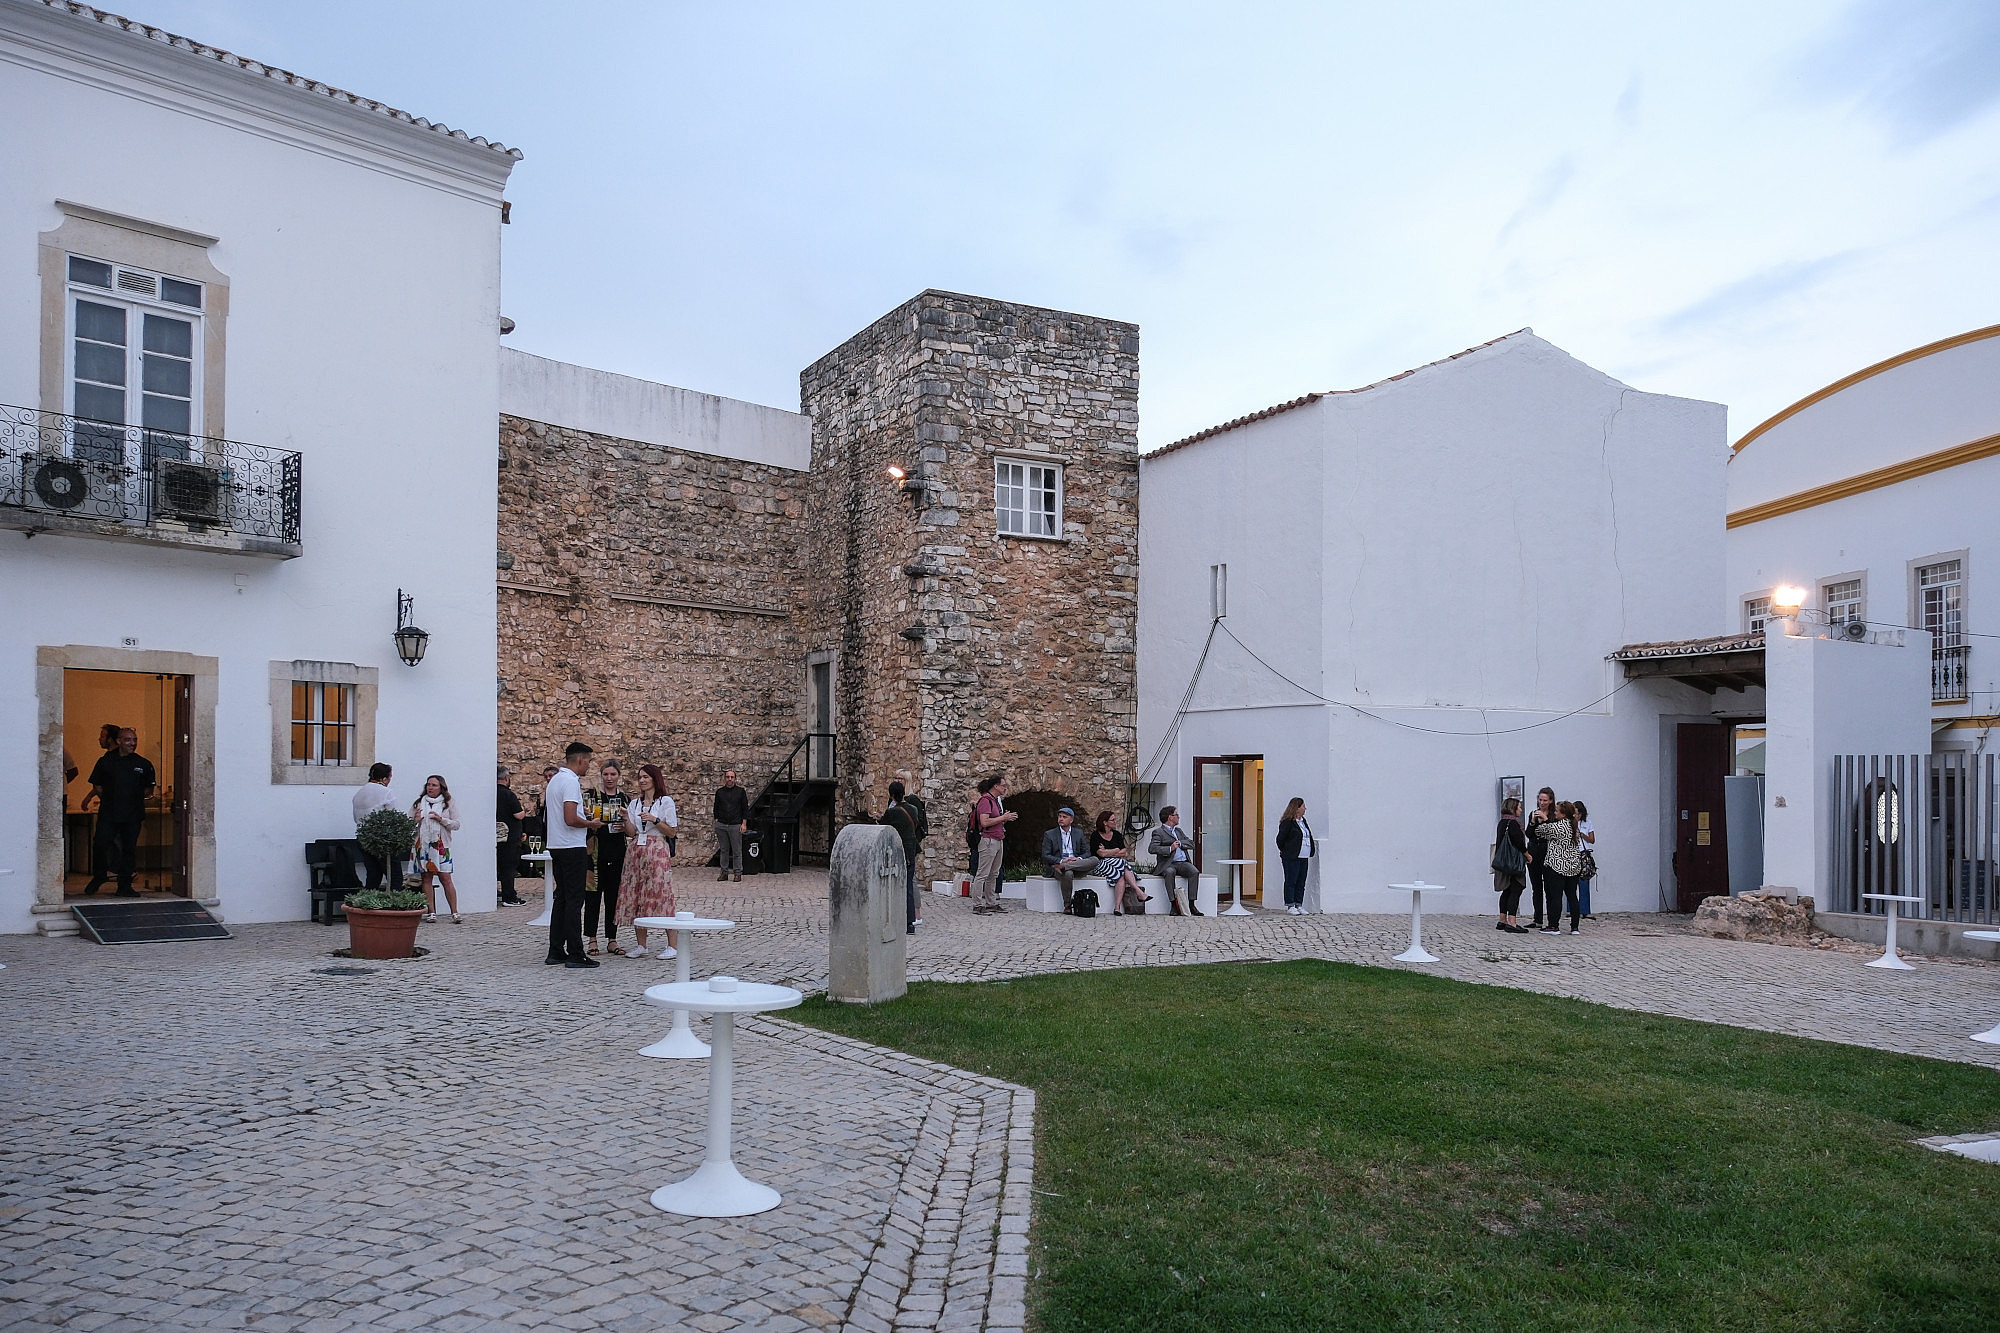 People are standing in groups inside a historic courtyard.  © Image: Jorge Gomes